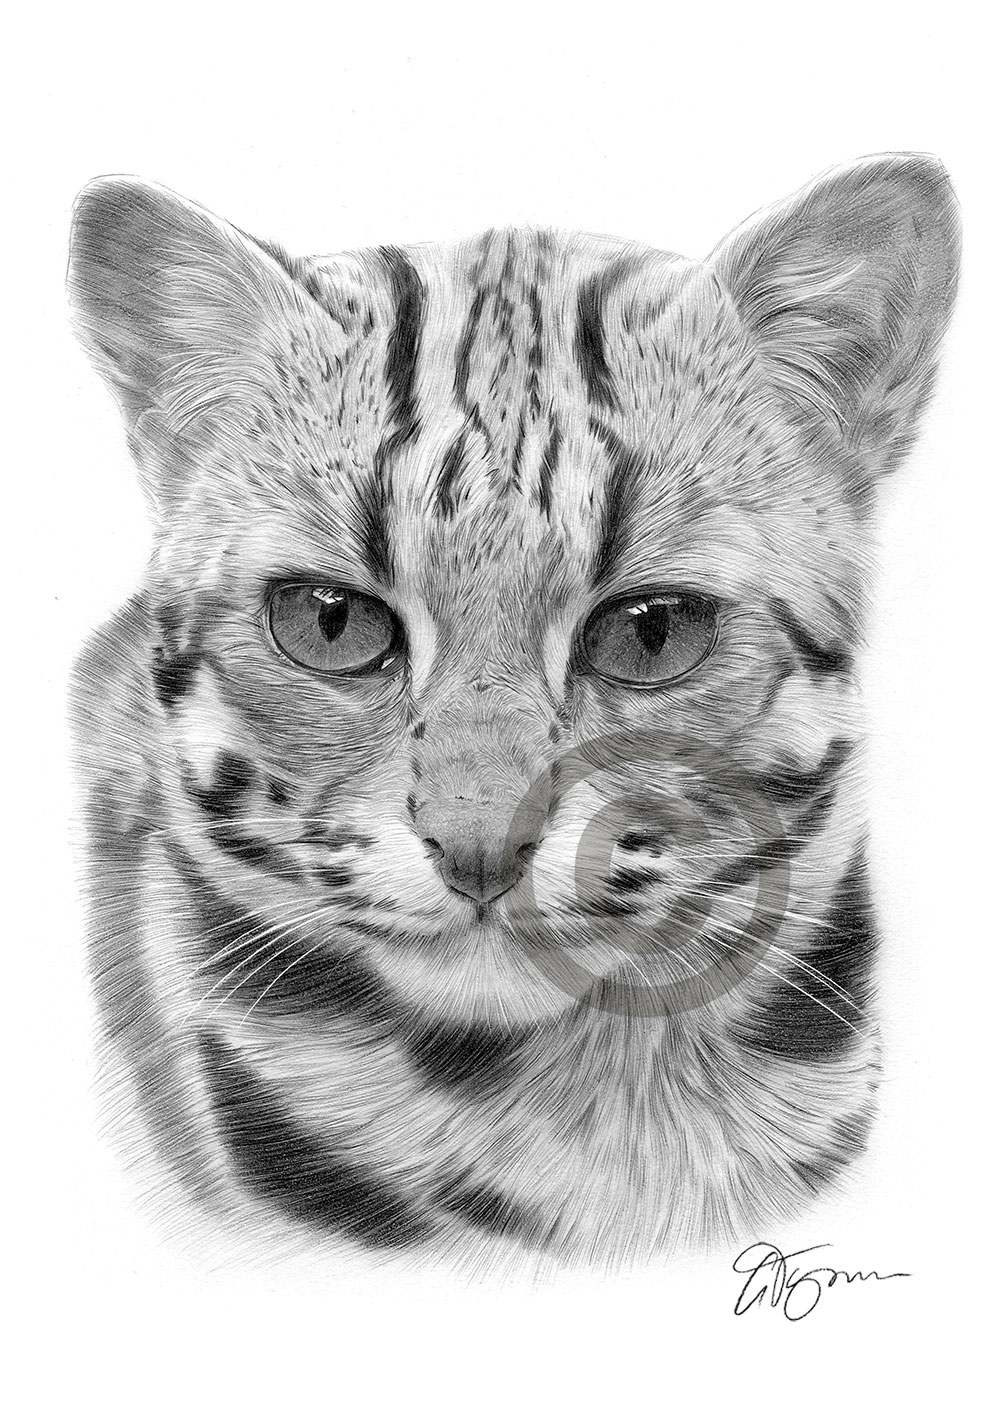 Pencil drawing of an Asian leopard cat by artist Gary Tymon